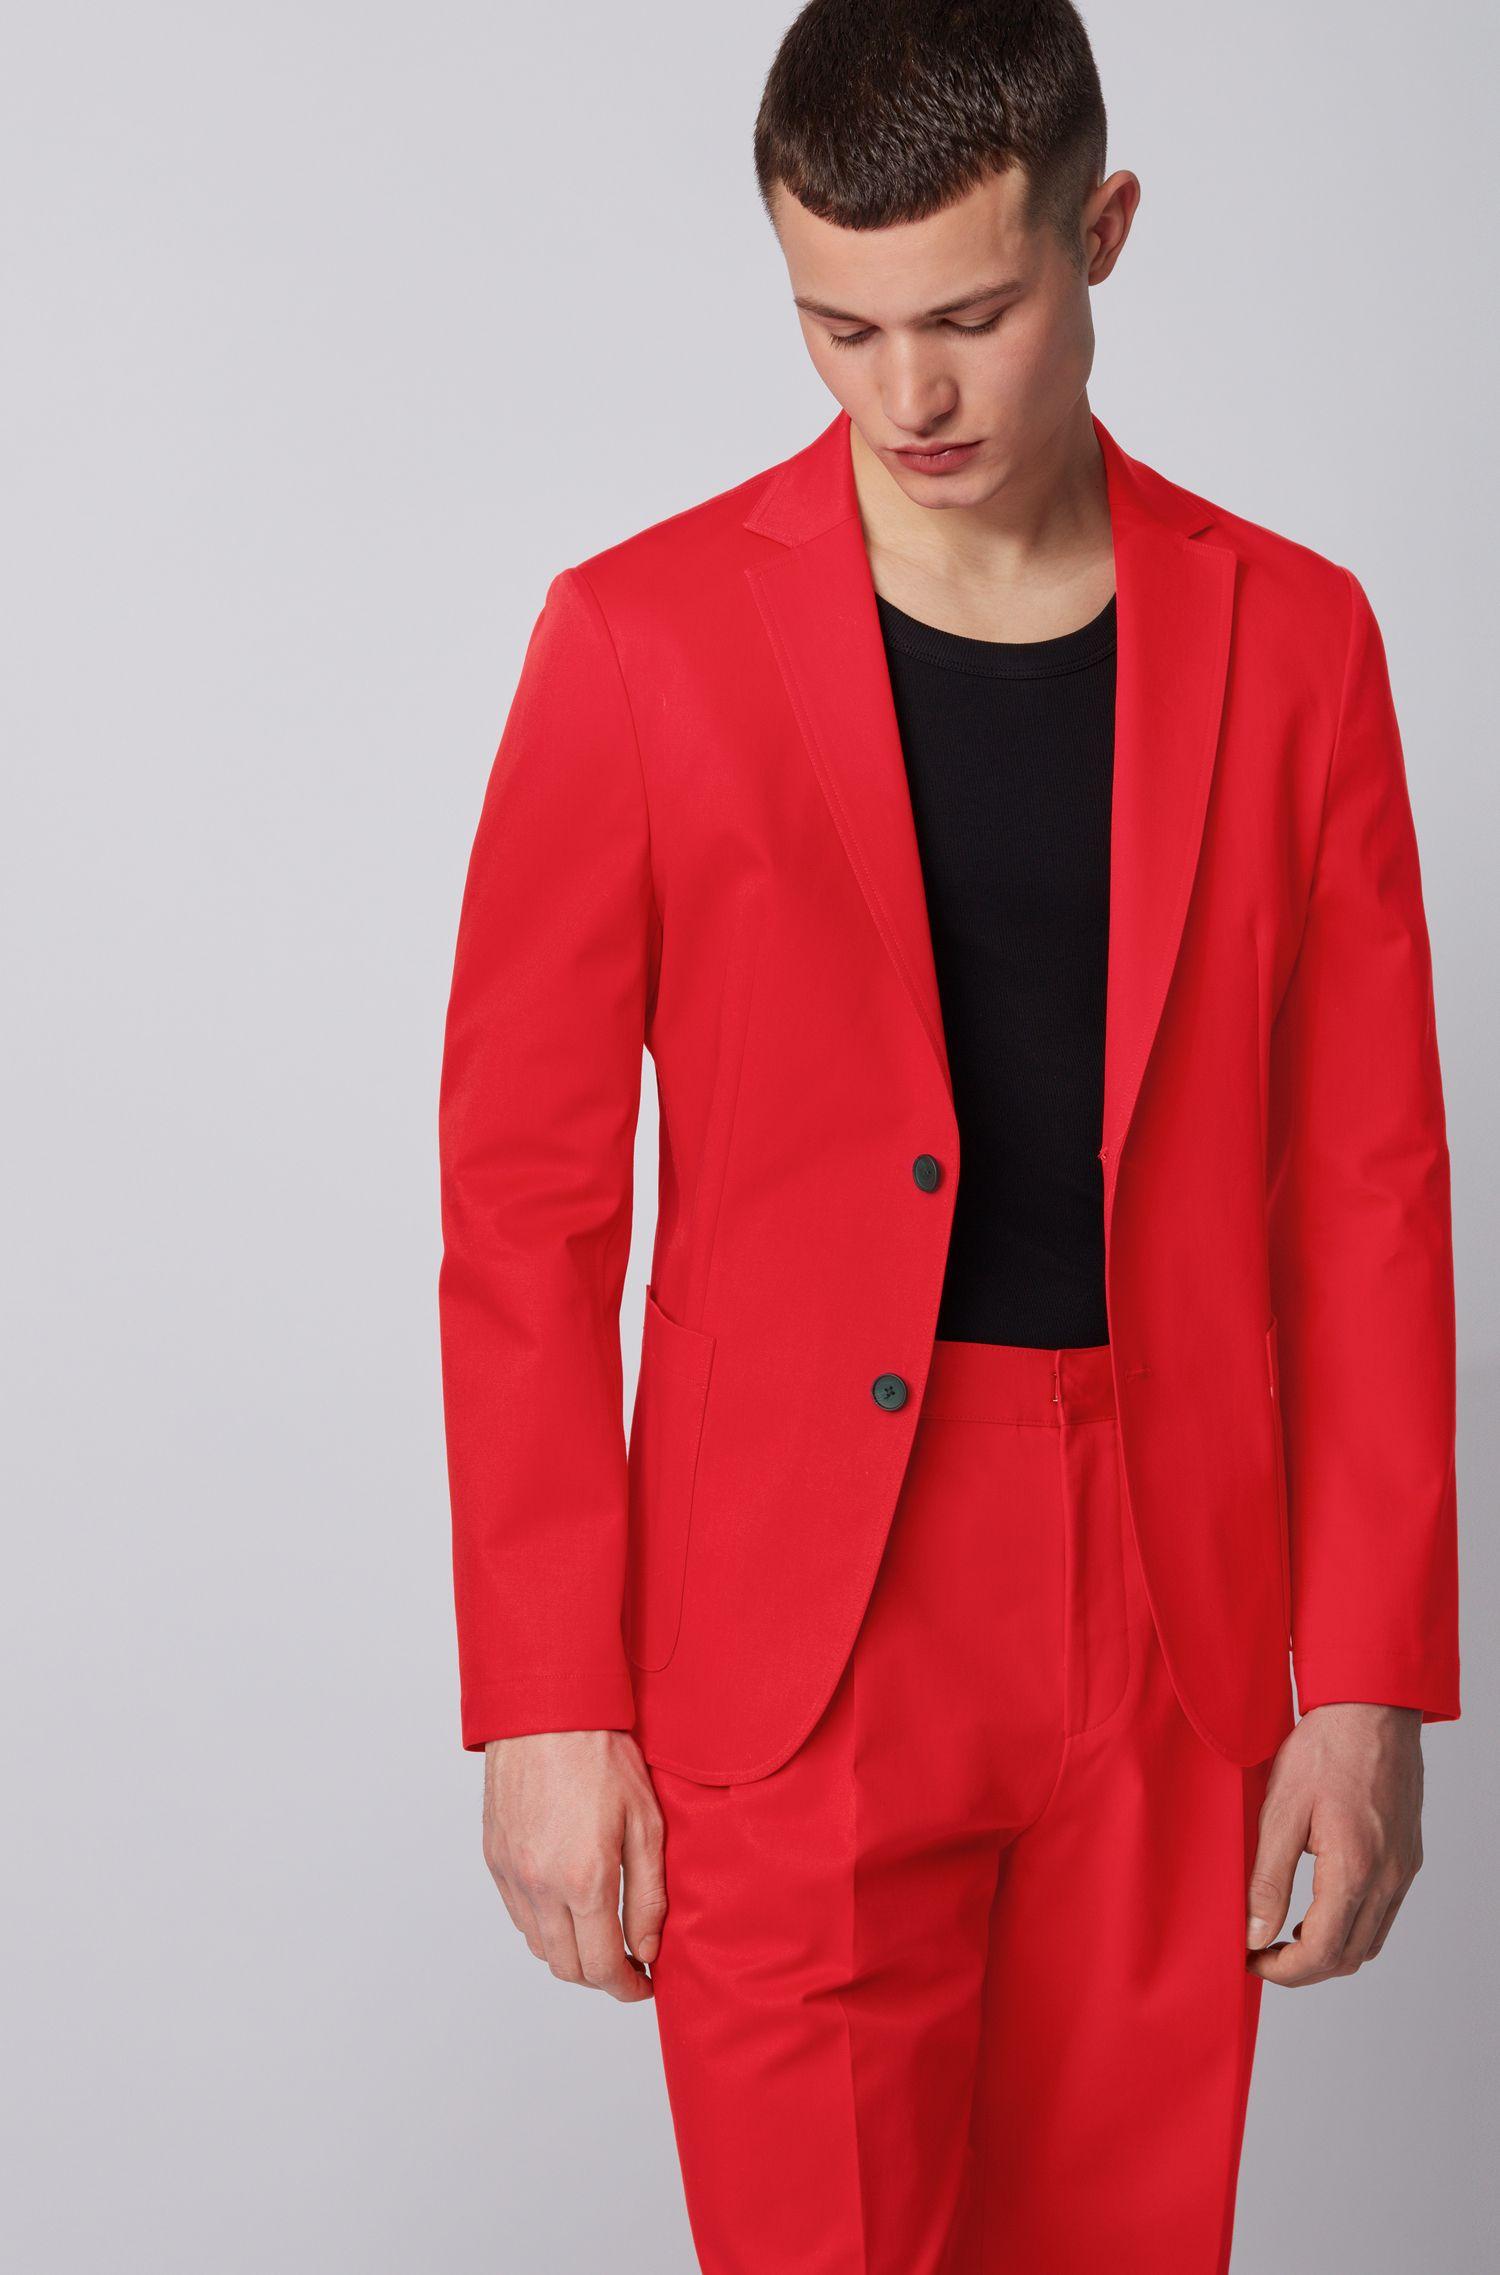 BOSS by Hugo Boss Slim Fit Jacket In Stretch Cotton in Red for Men - Lyst